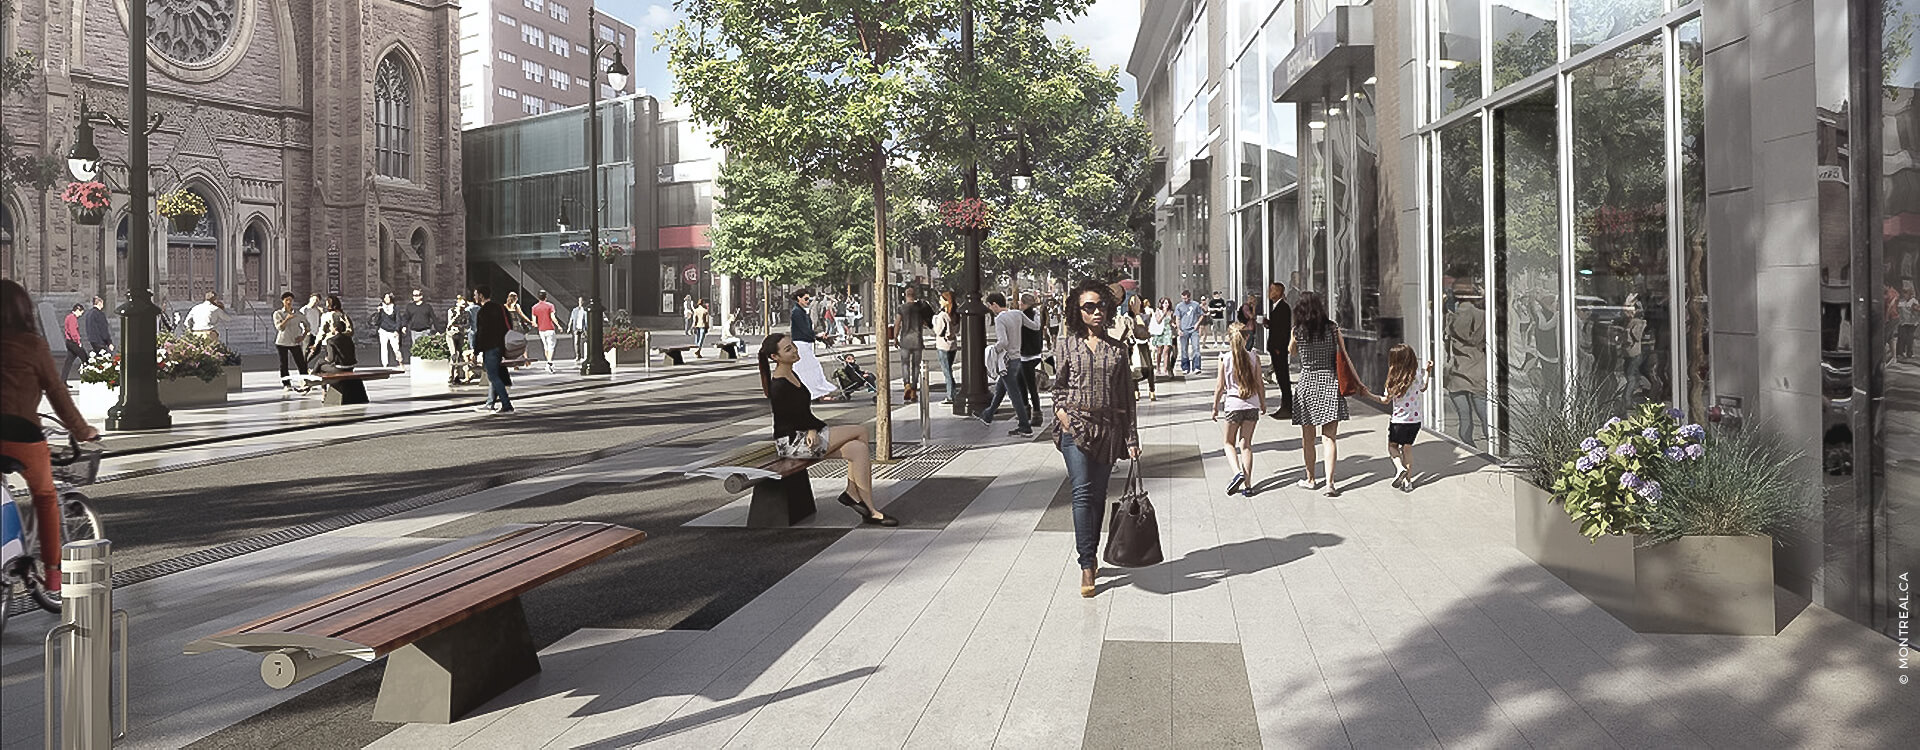 Sainte-Catherine Street West Redevelopment Project in Montreal, Quebec | WSP / EXP: Engineering Consultants, Urban Development and Sustainable Mobility